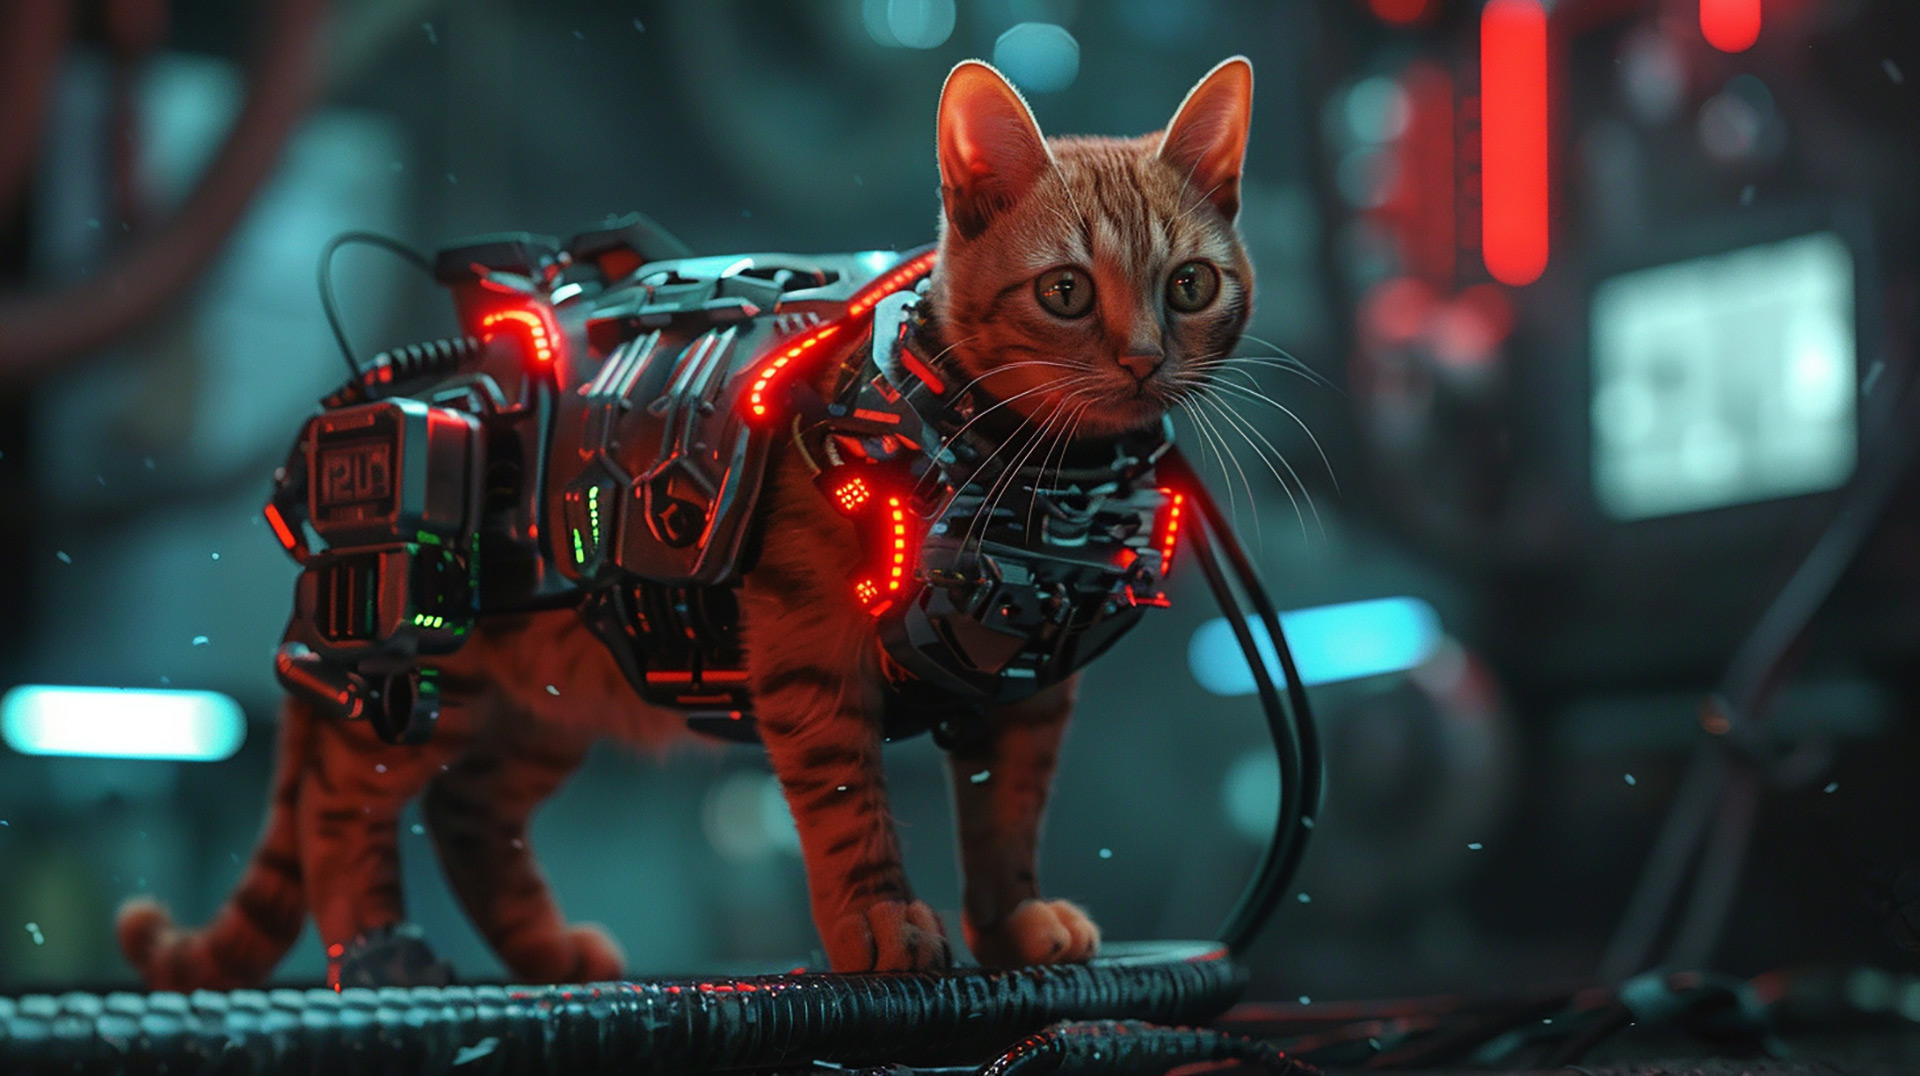 Transform Your Screen with Robot Cat Images in 8K